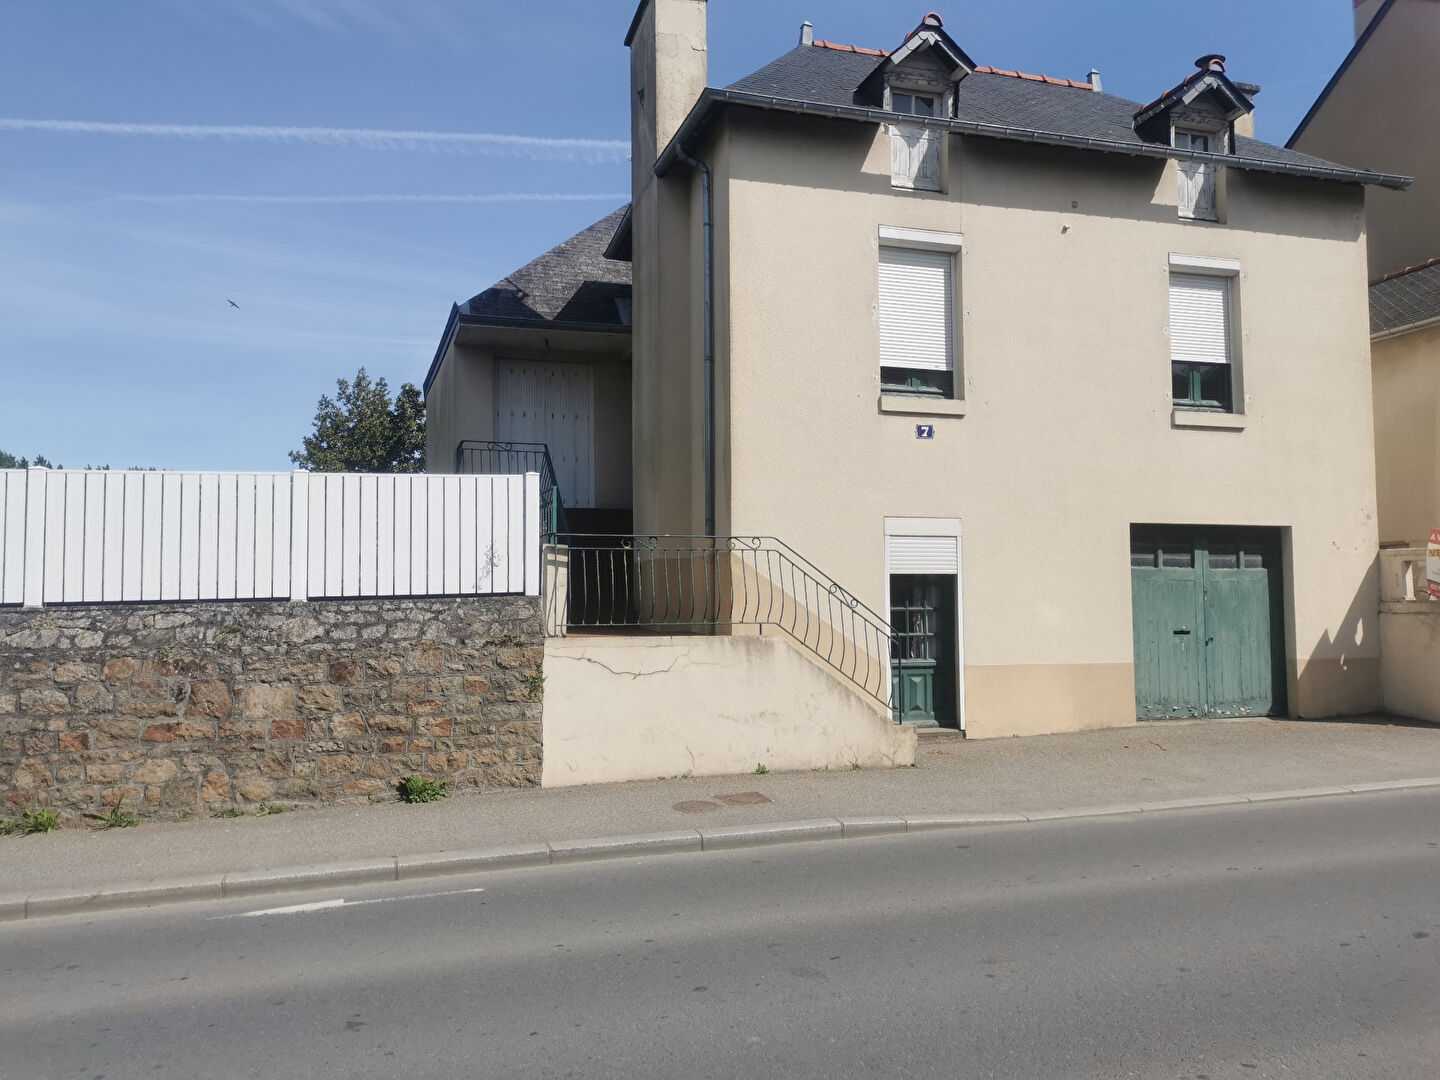 Hus i Combourg, Brittany 11866642